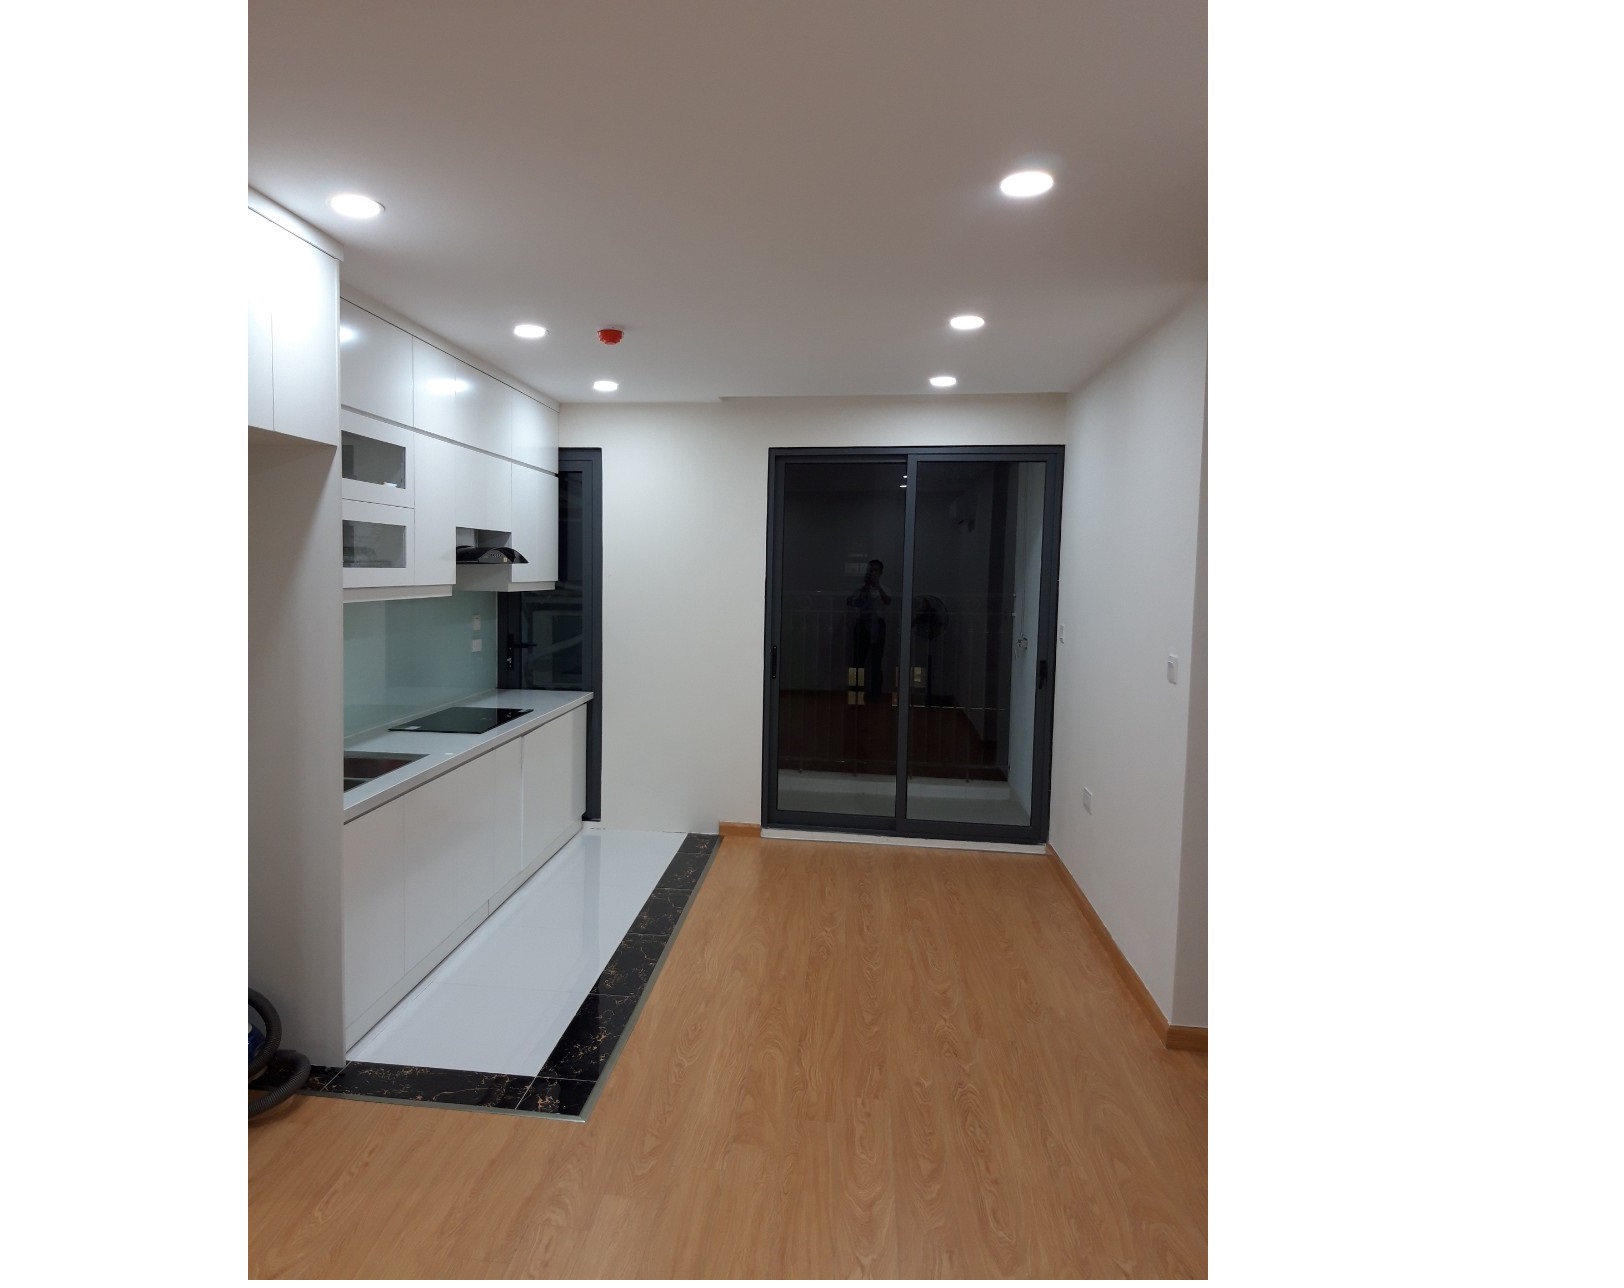 1 bedroom apartment for rent in The Garden Hills, Tran Binh street, Cau Giay district